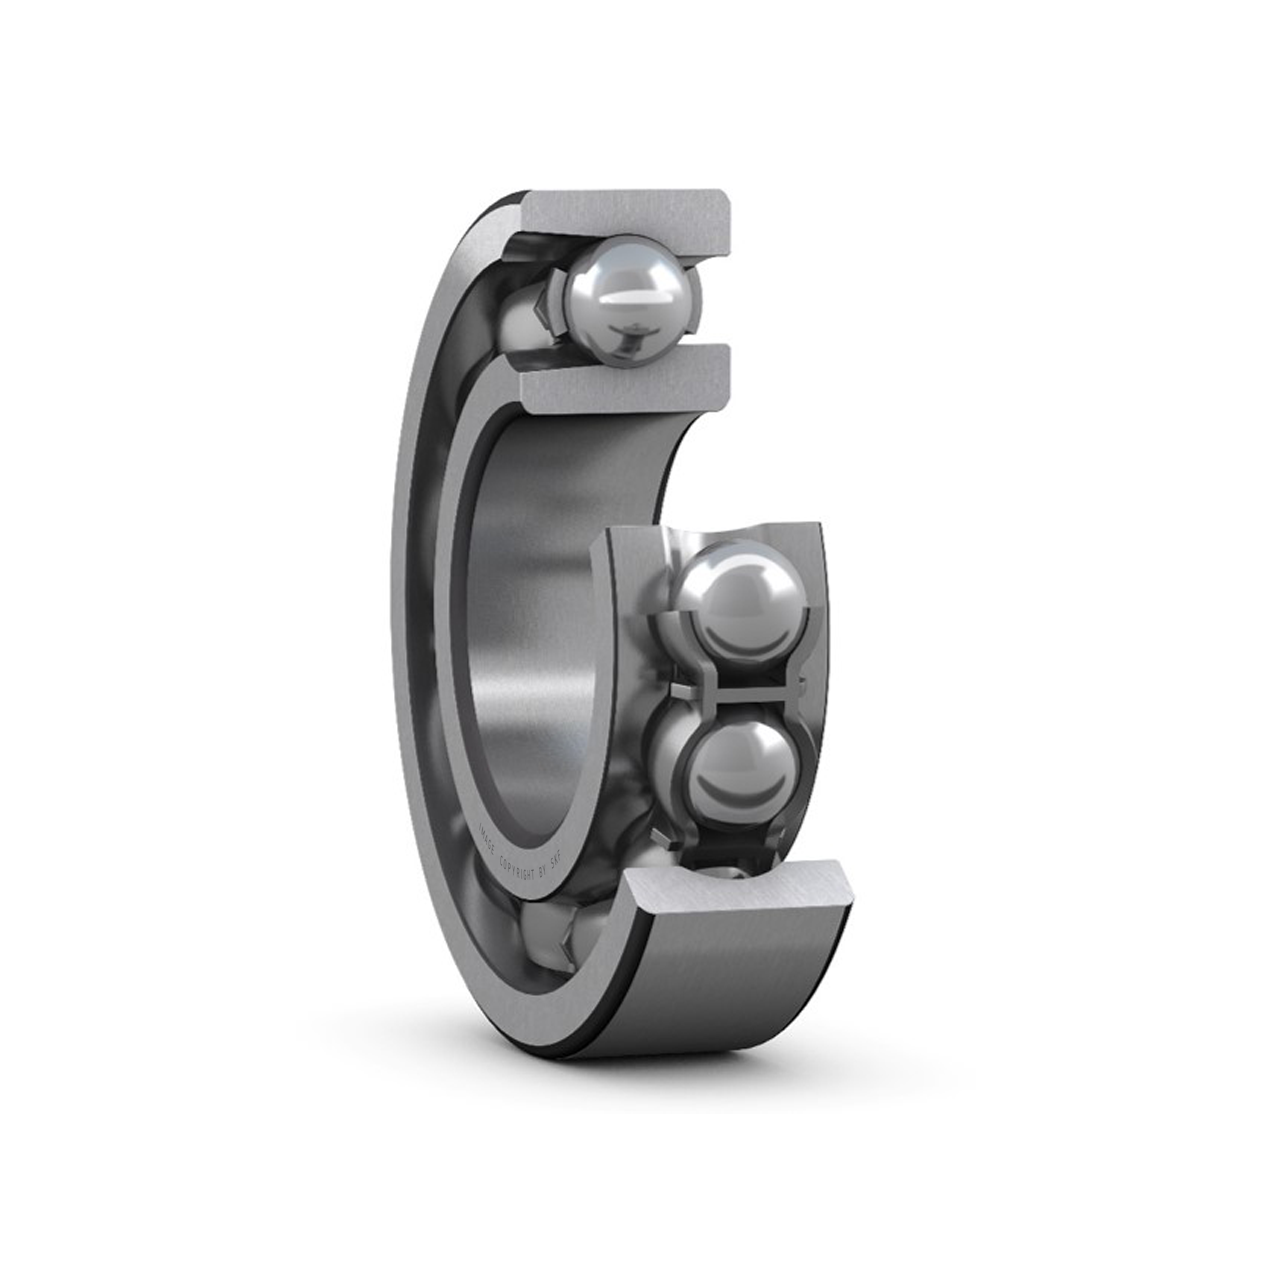 categories/181222_202358834354_SKF-deep-groove-ball-bearing-with-filling-slots-open-steel-cage